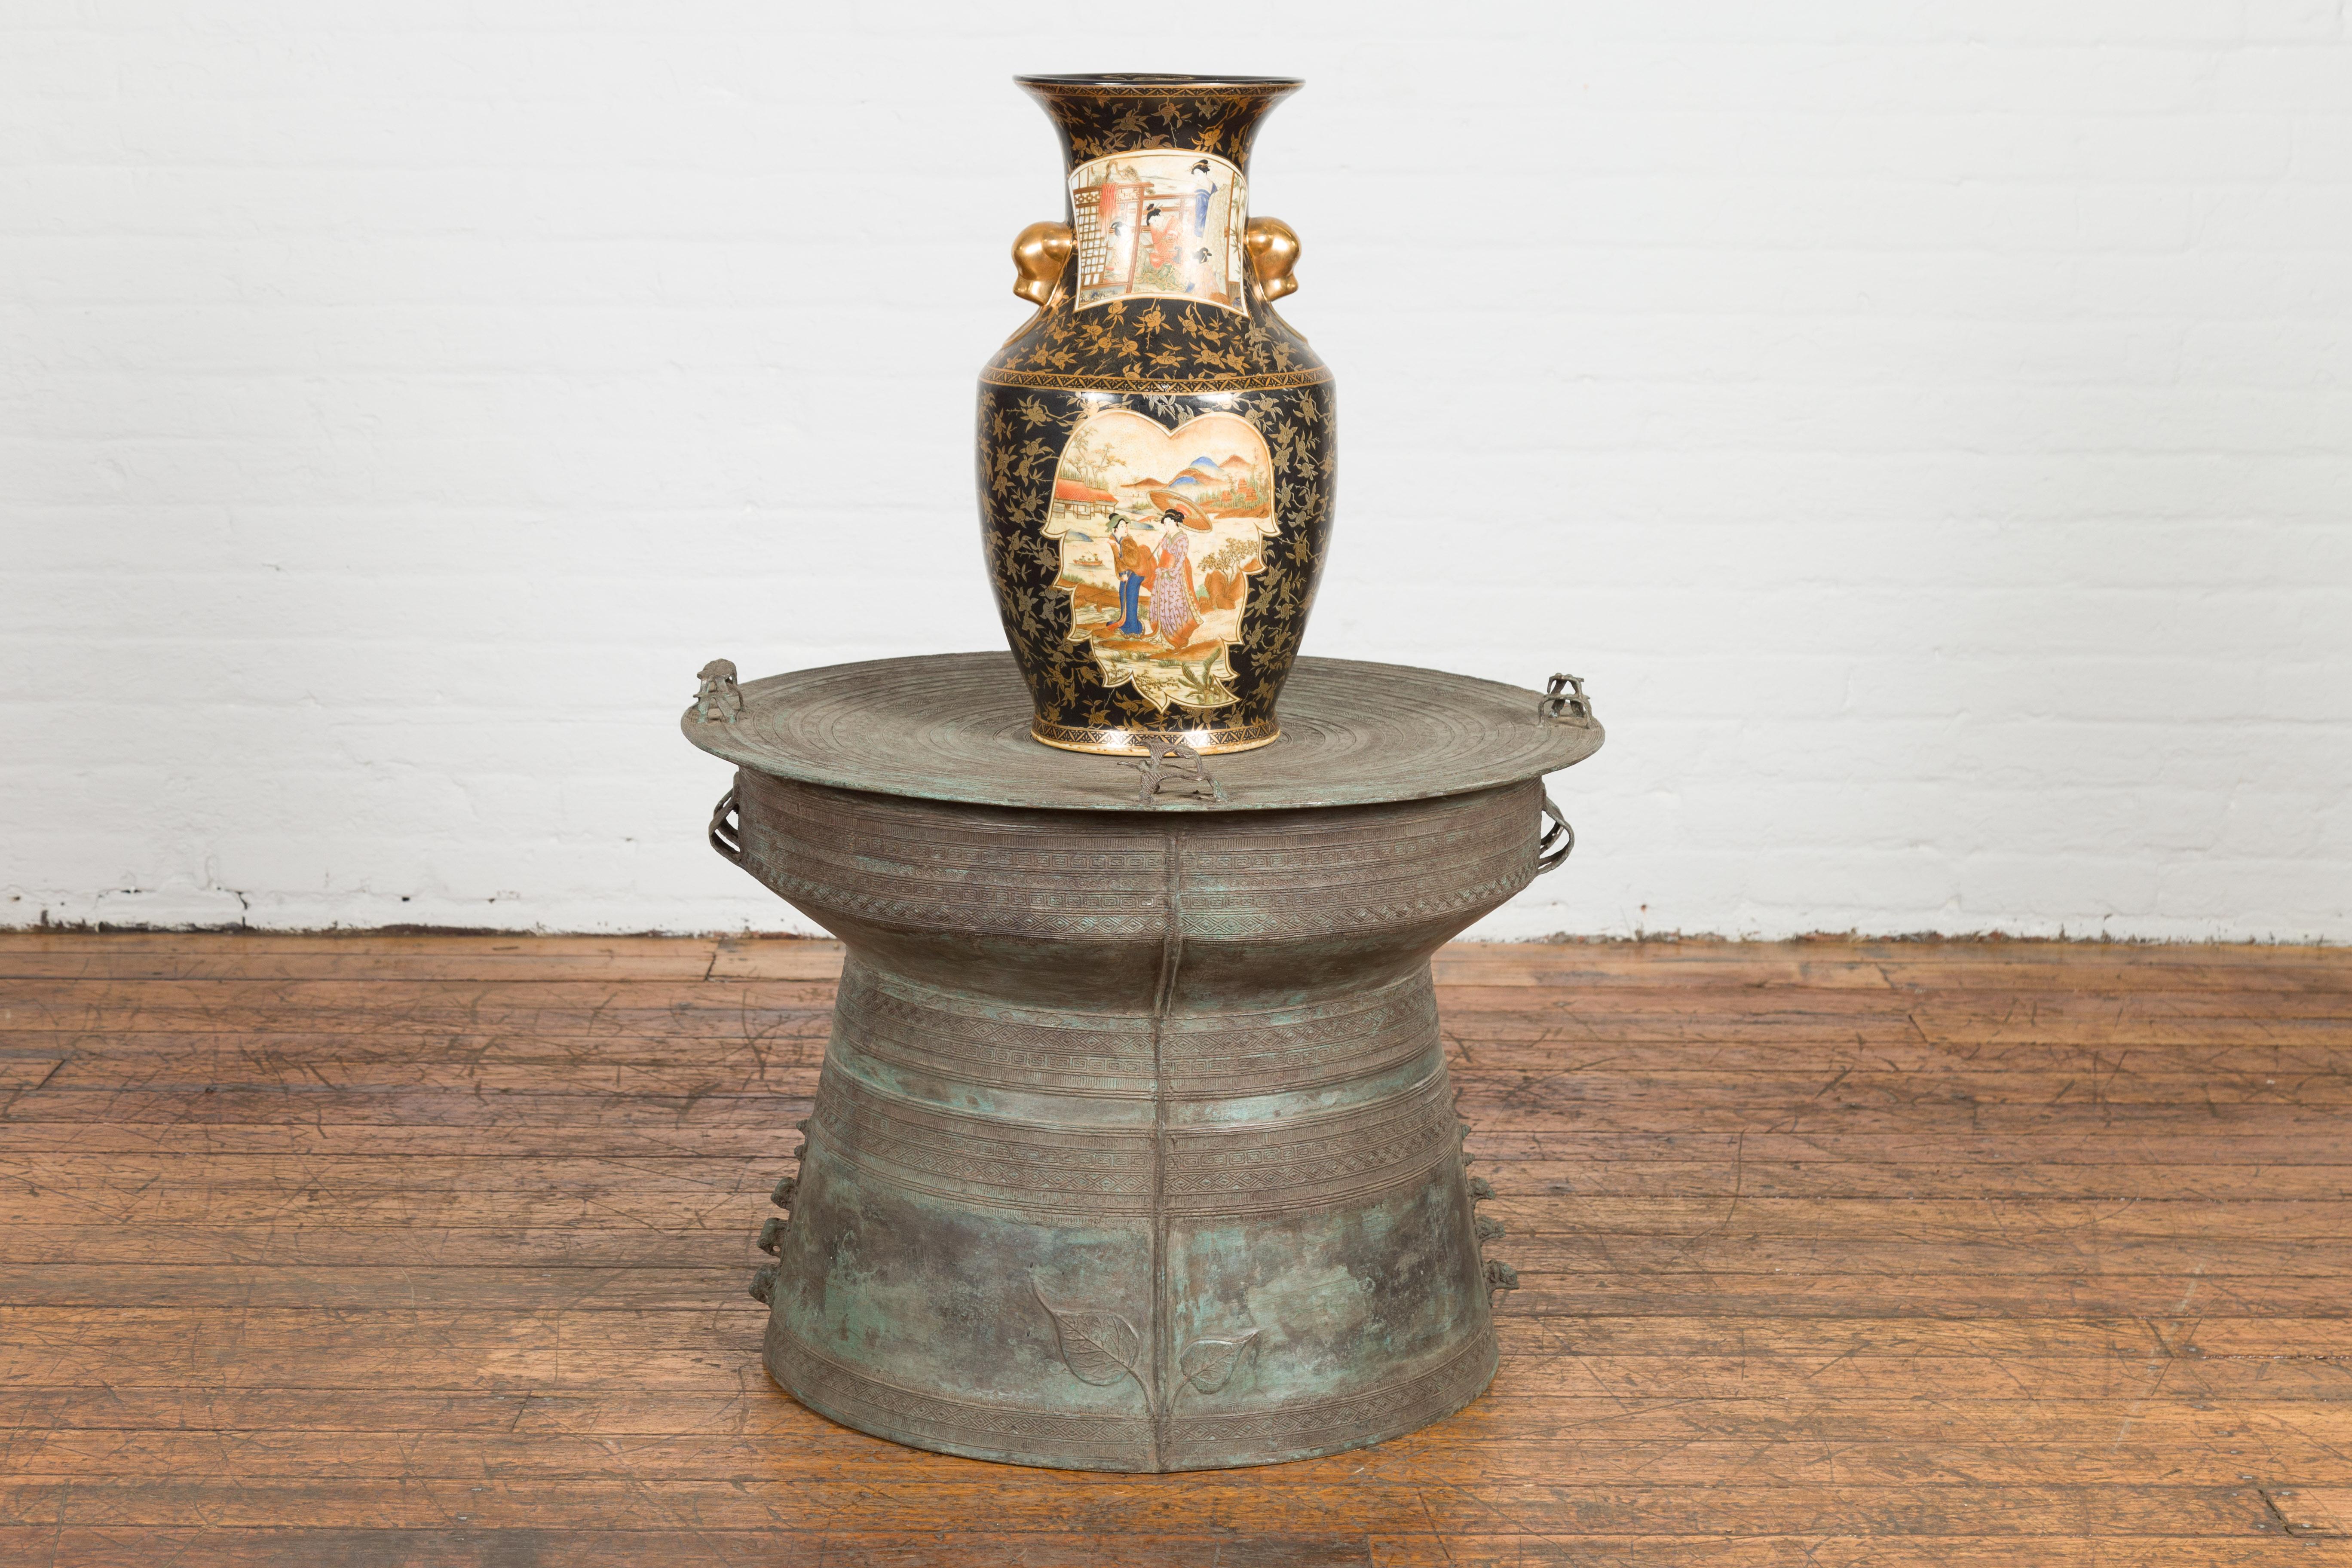 Laotian Style Vintage Bronze Rain Drum with Geometric Motifs and Frog Finials In Good Condition For Sale In Yonkers, NY